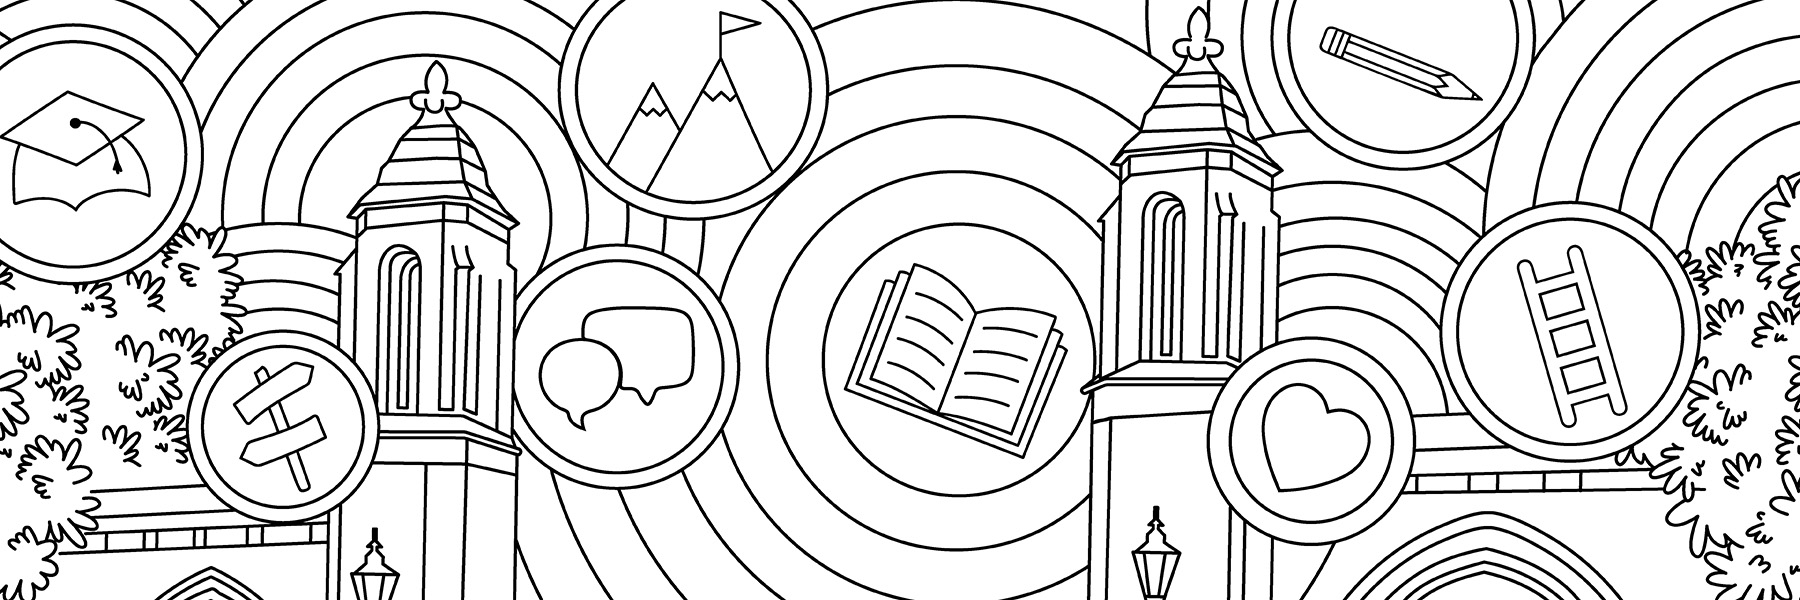 Campus illustrations from the cover of the Walter Center's career planning guide